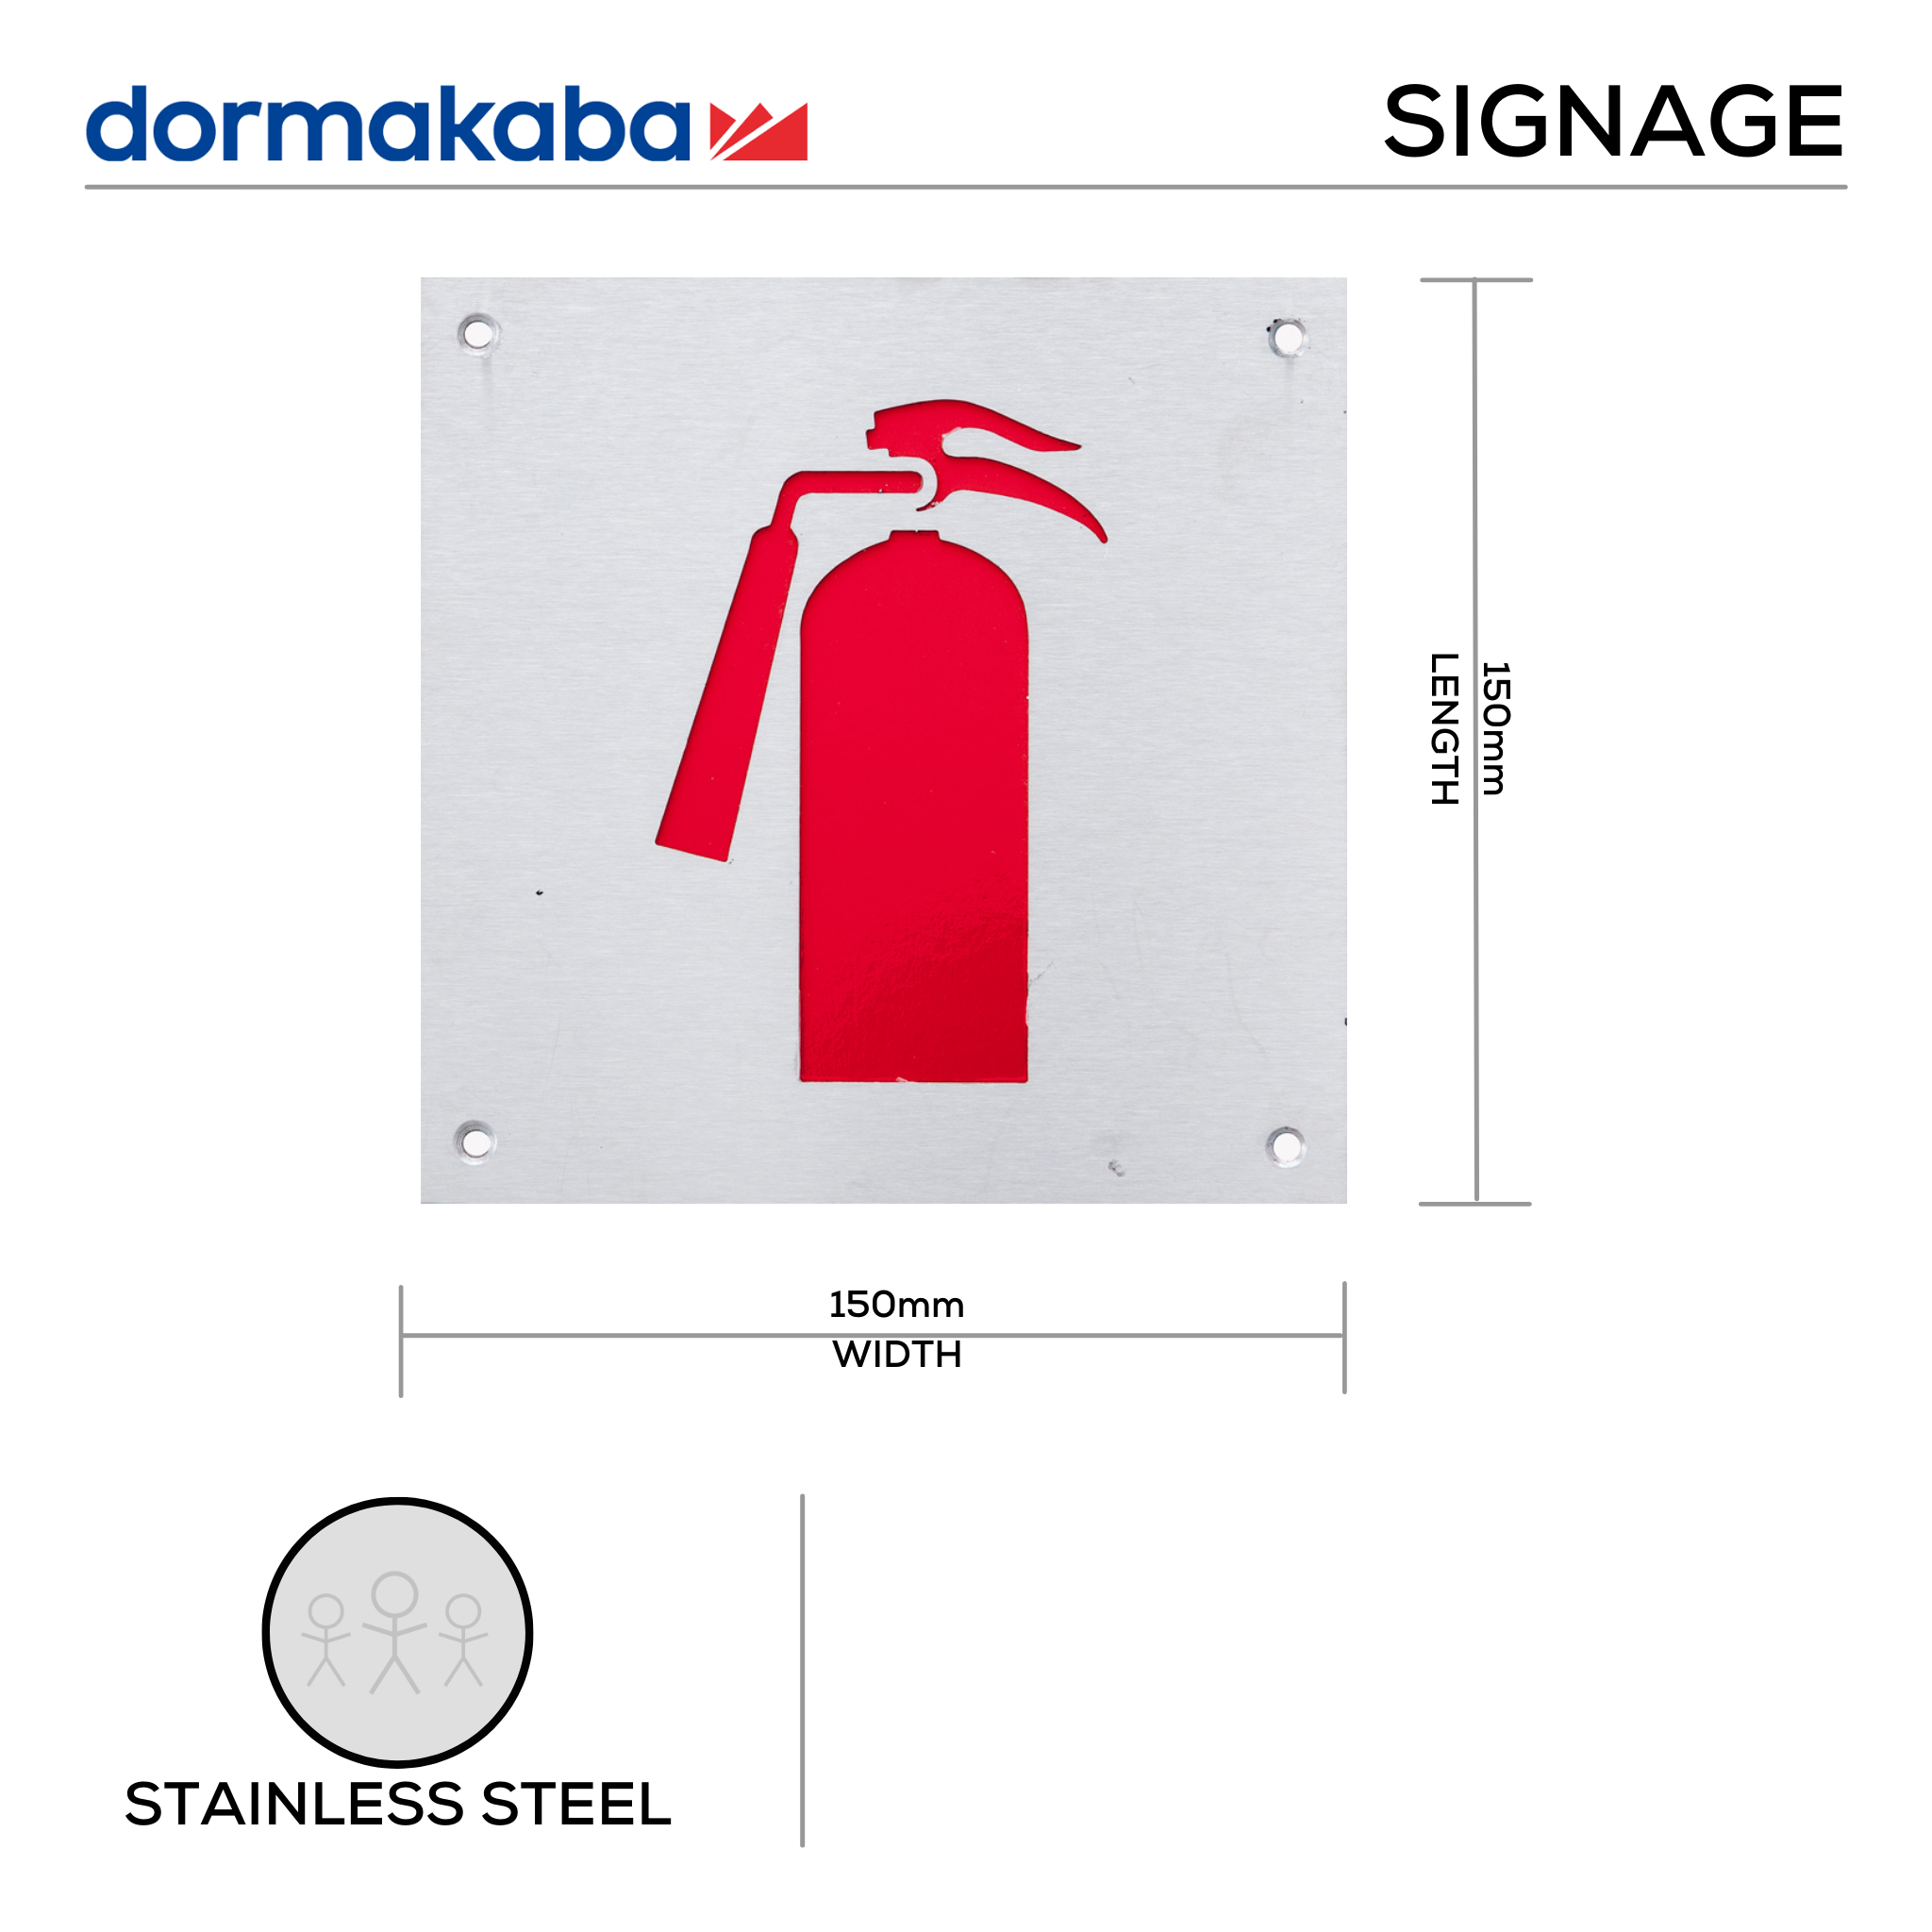 DSS-146, Door Signage, Fire Extinguisher , 150mm (l), 150mm (w), 1,2mm (t), Stainless Steel, DORMAKABA